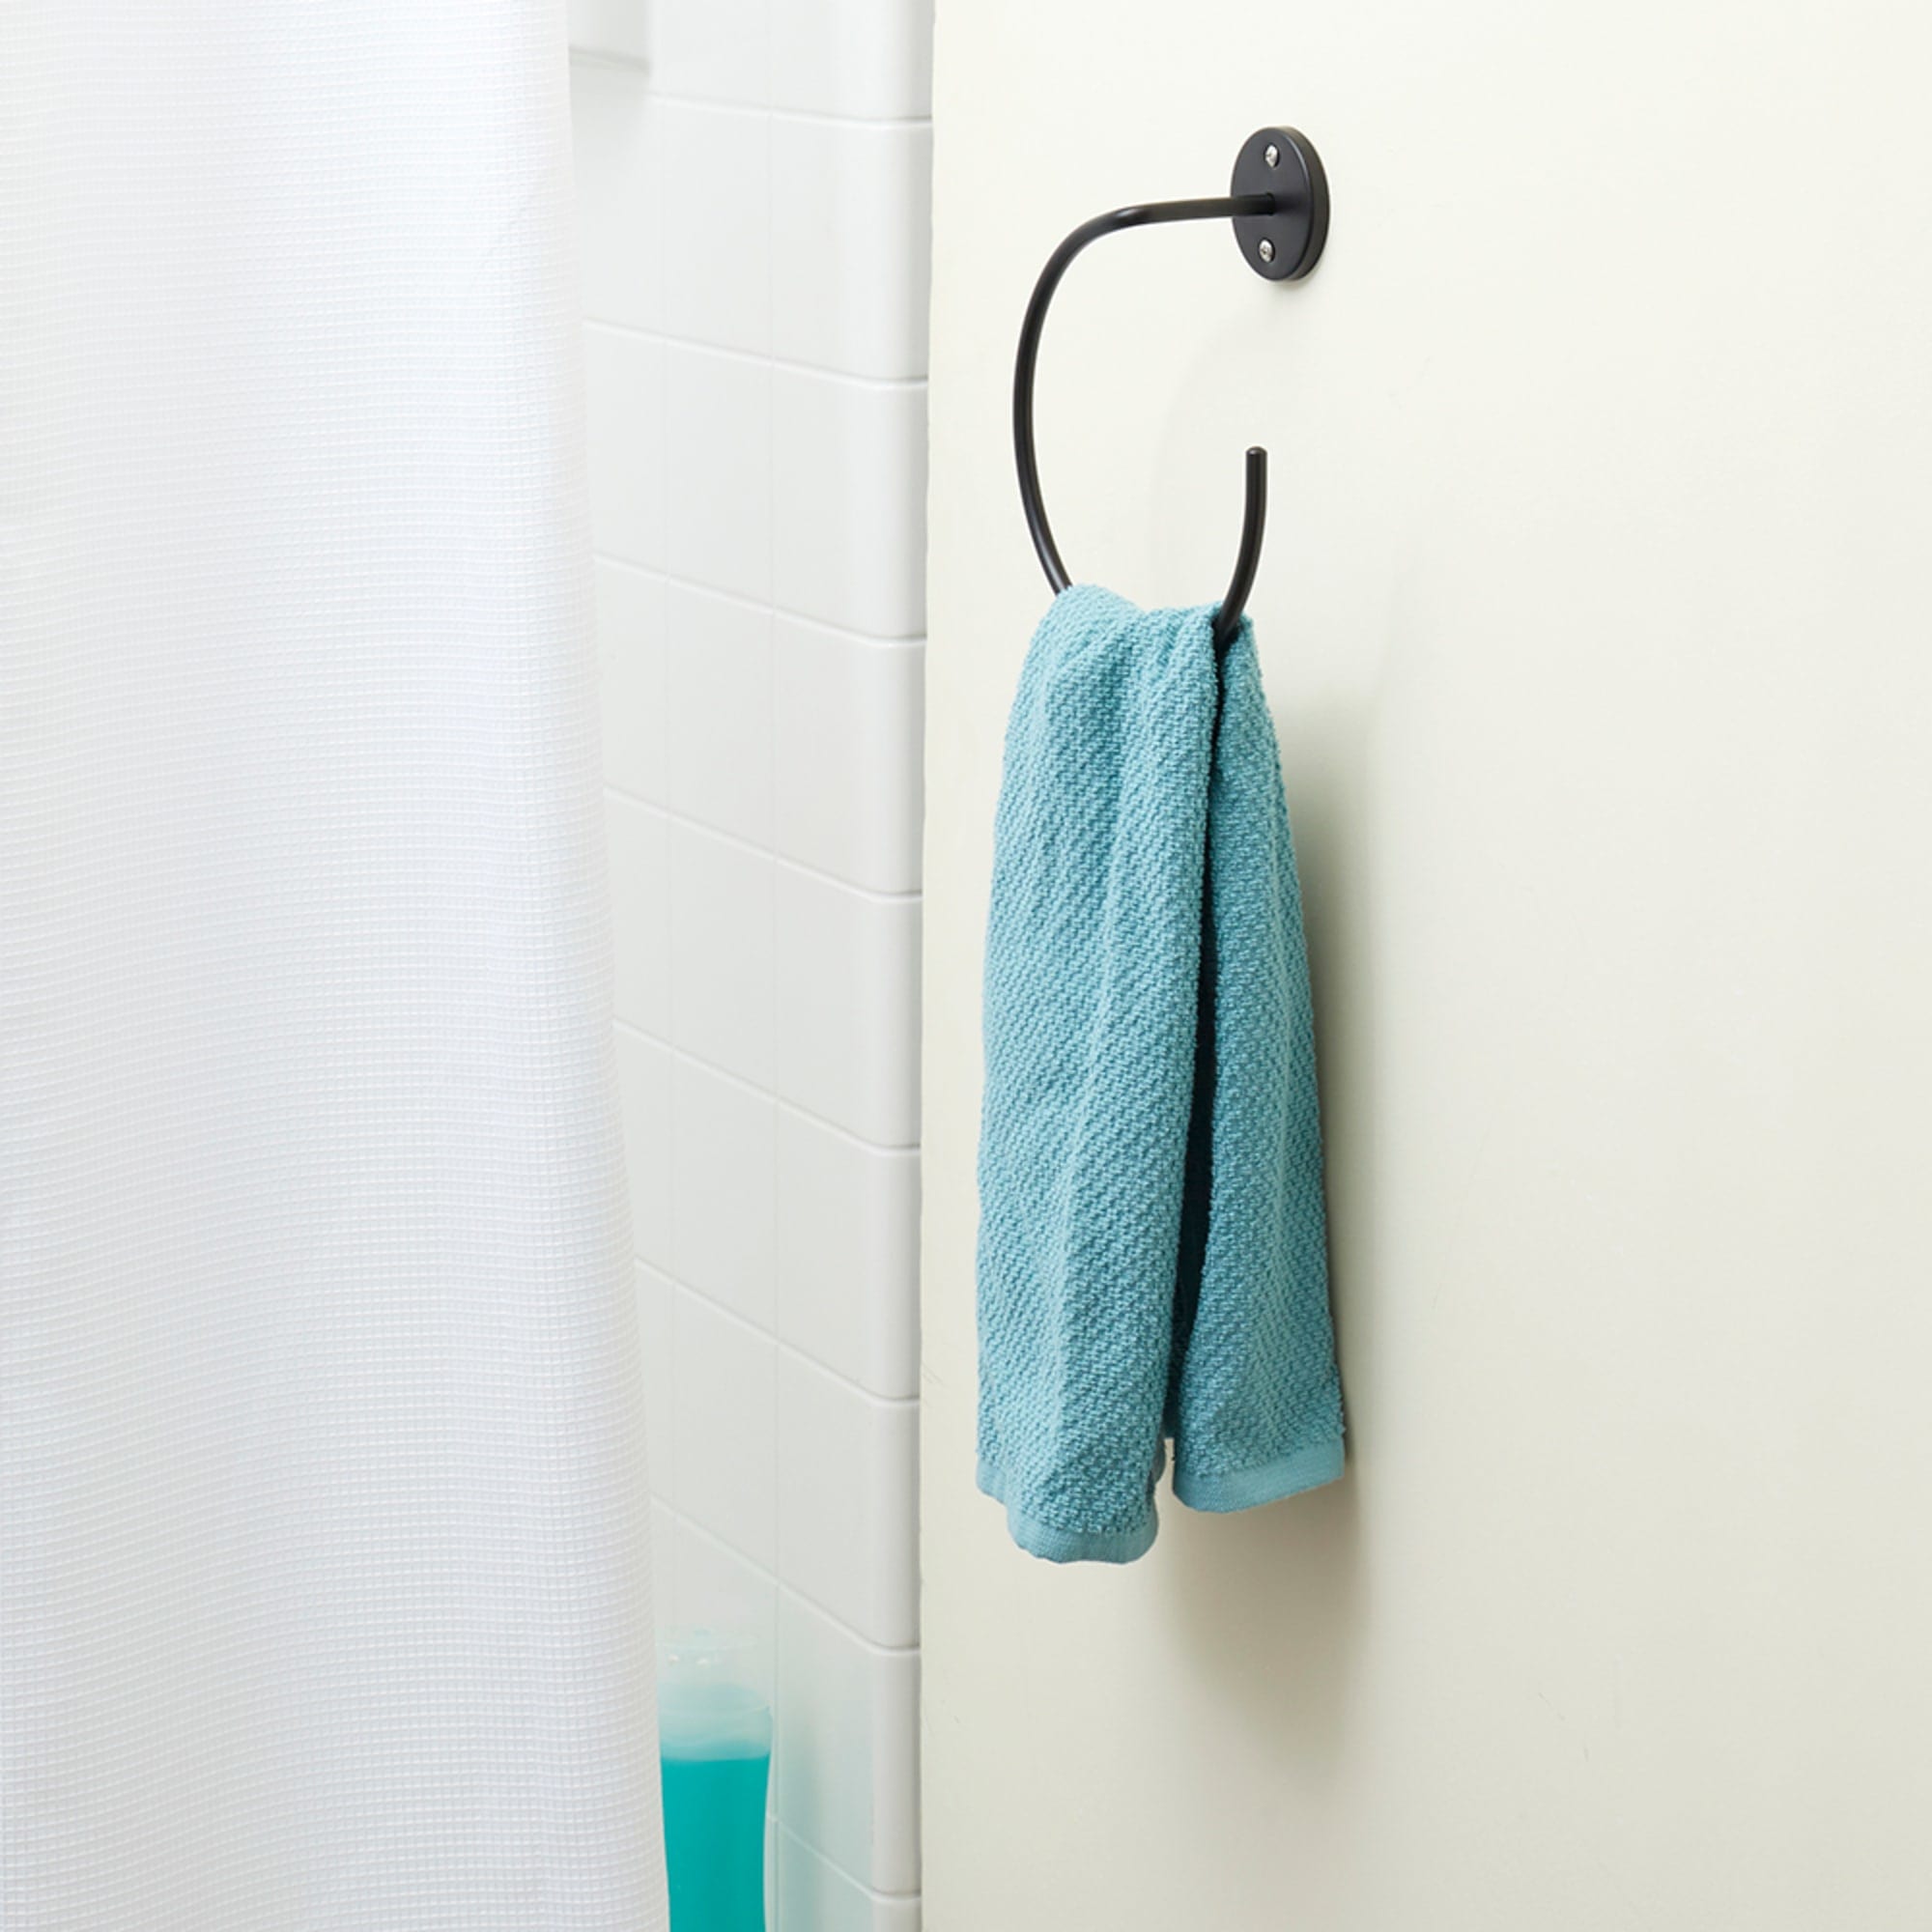 Home Basics Chelsea Wall Mounted Open Towel Ring $5.00 EACH, CASE PACK OF 12